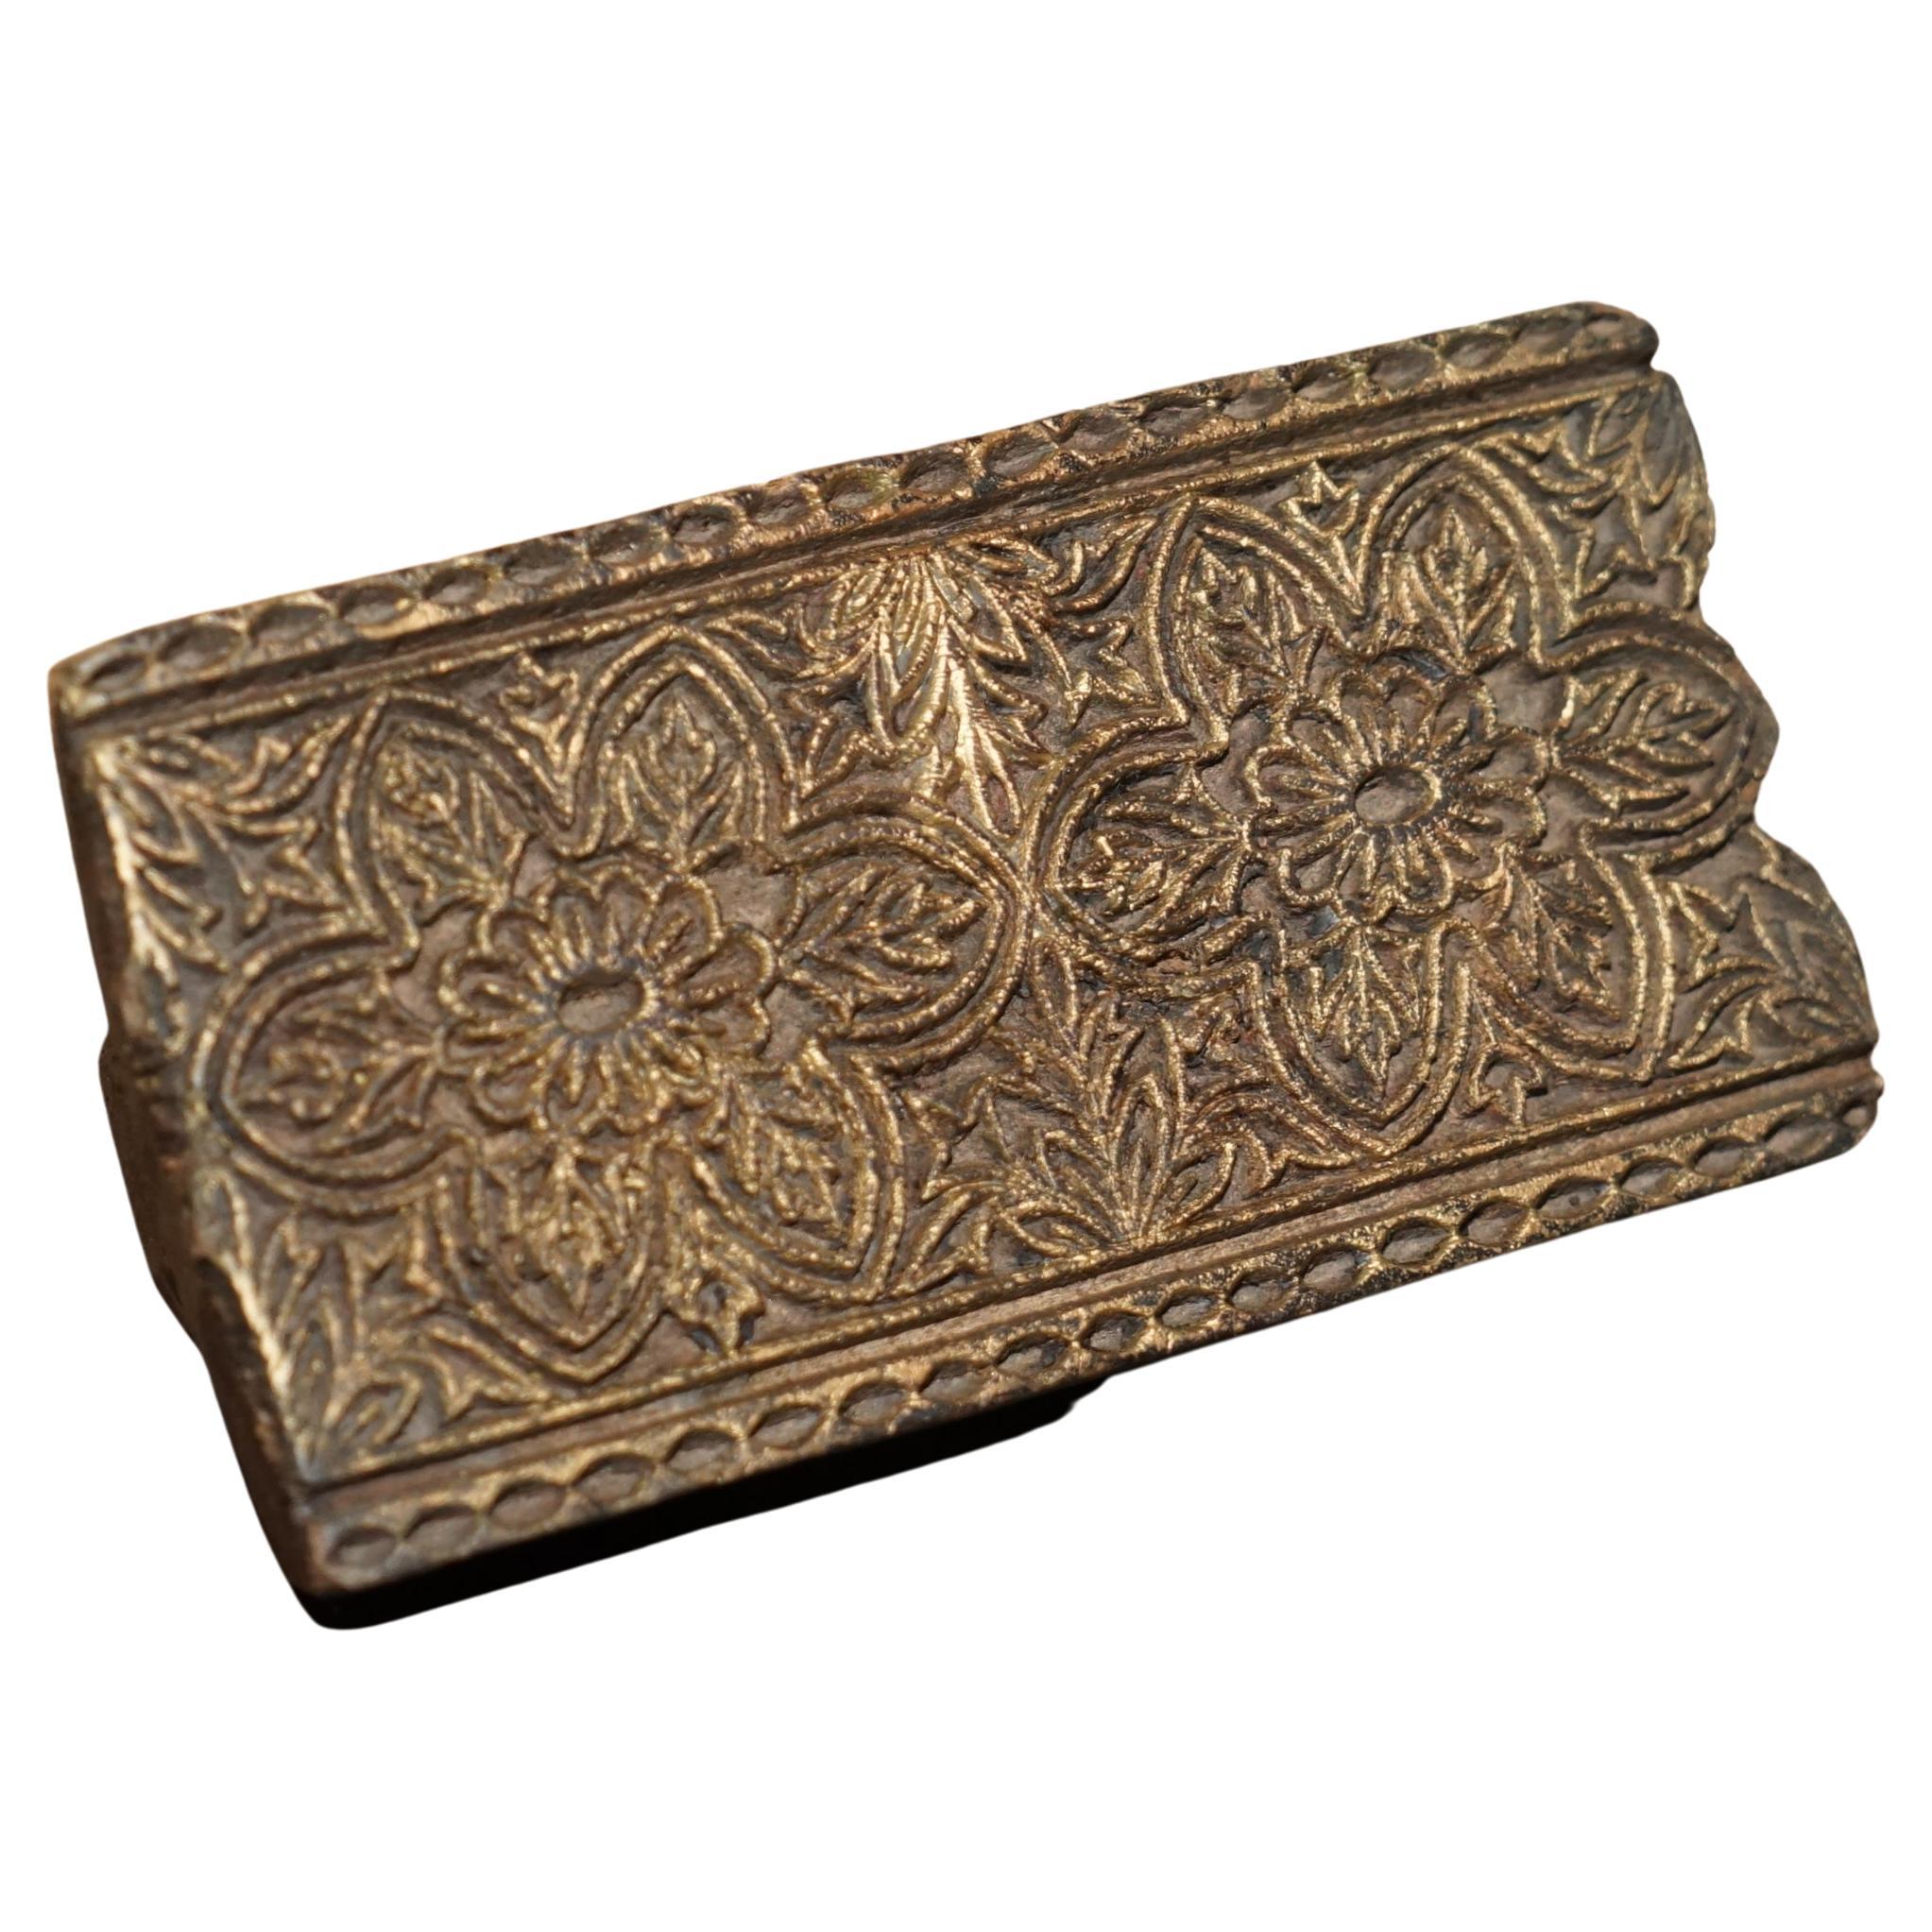 Very Collectable Antique Hand Carved Double Flower Printing Block for Wallpaper